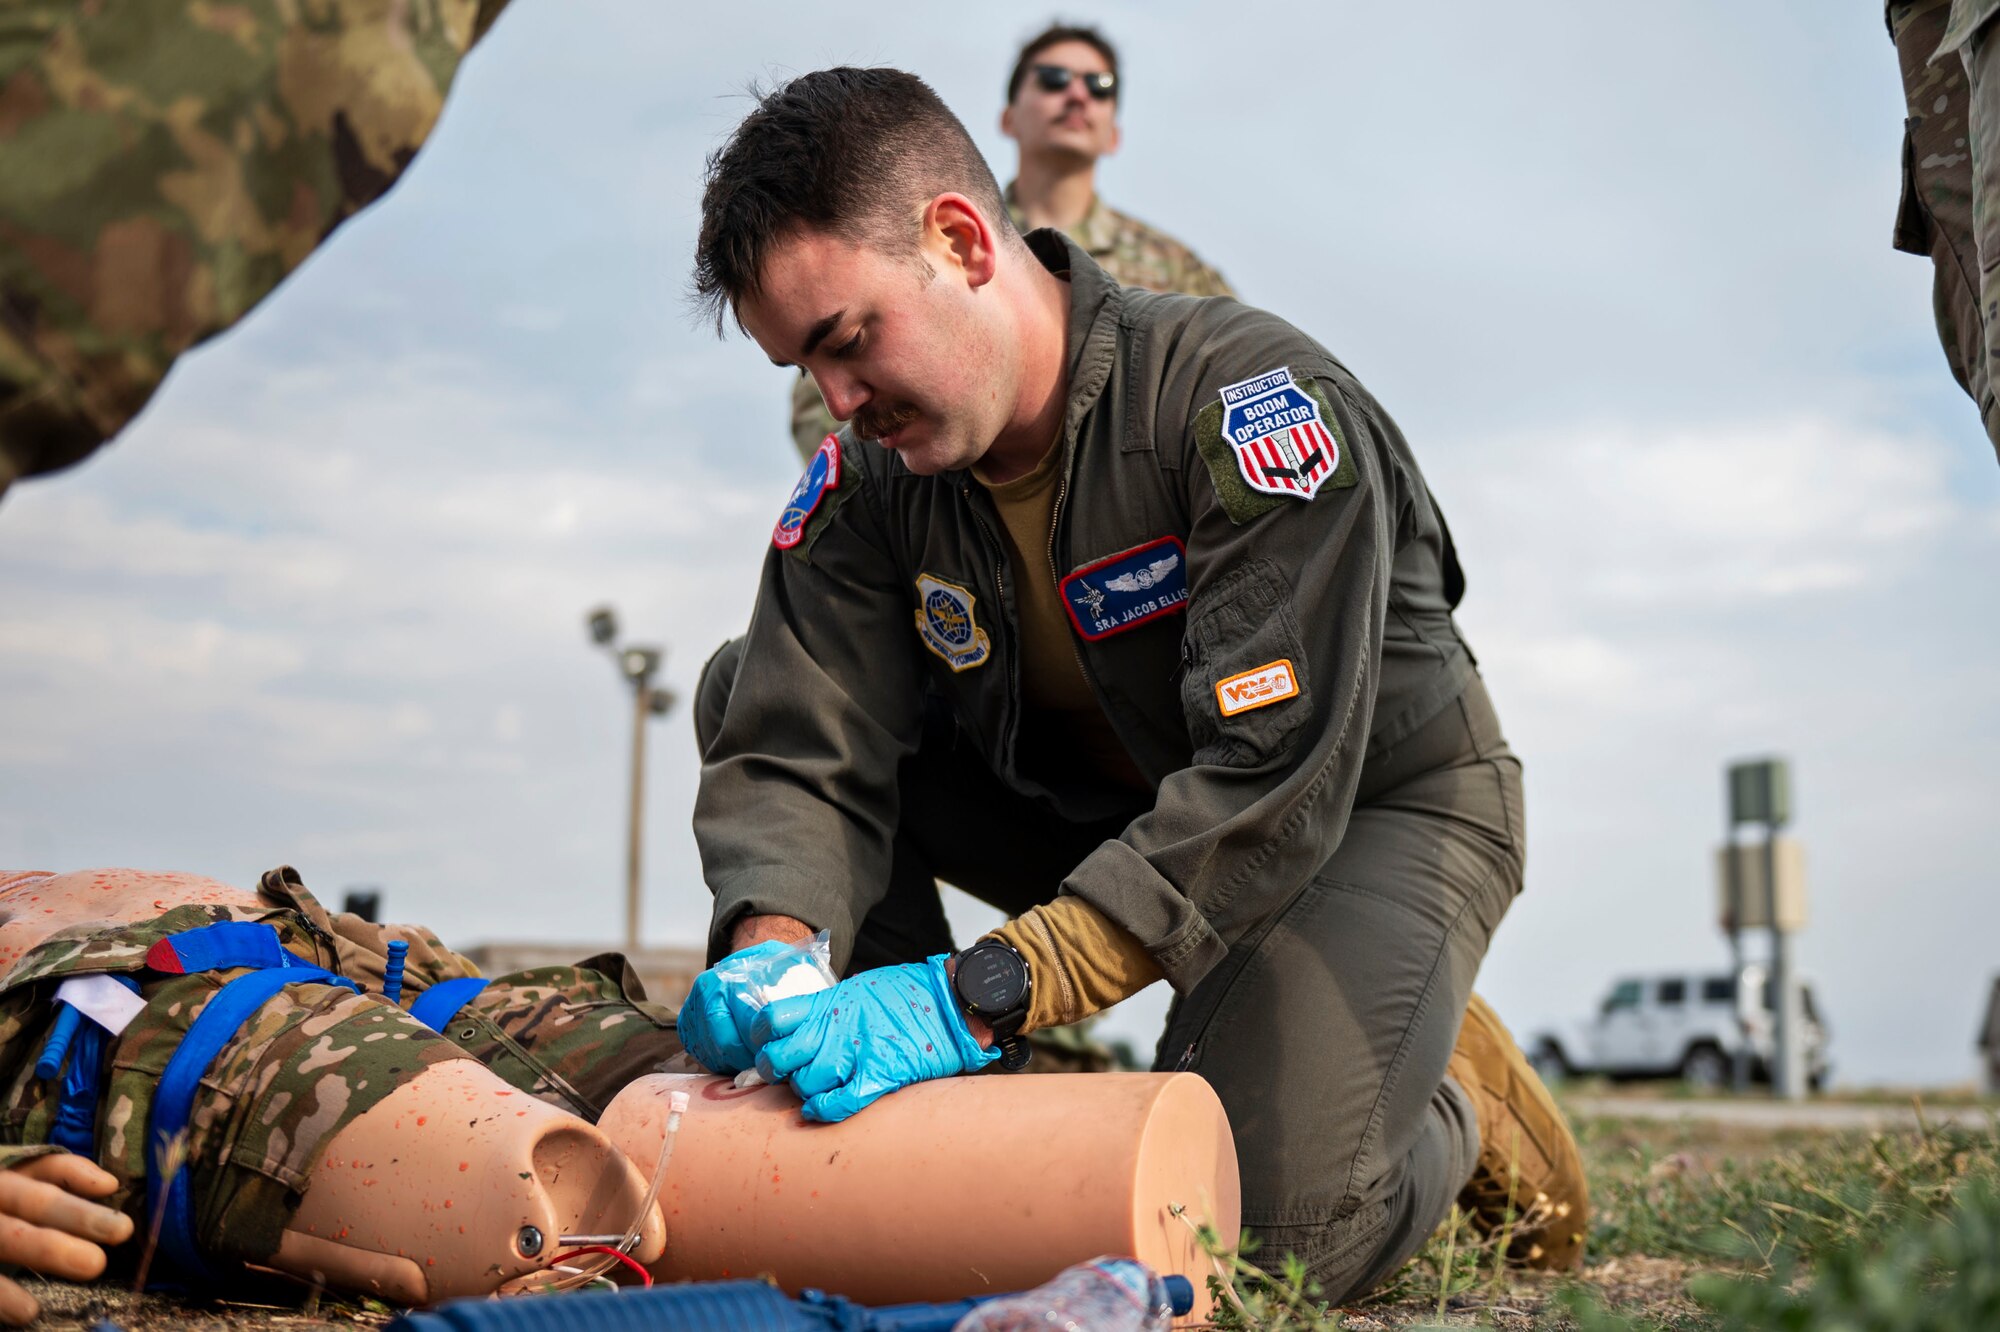 Senior Airman Jacob Ellis, an in-flight refueling specialist assigned to the 93rd Air Refueling Squadron, treats a simulated casualty during a “boom rodeo" hosted by the 92nd Operations Group at Fairchild Air Force Base, Washington, Sept. 20, 2023. During the rodeo, six air refueling squadrons competed in a forklift loading event, Tactical Combat Casualty Care and a water survival scenario. Scenarios like this enable Airmen to get hands-on training with tools to which they may not otherwise have access. These competitions also build camaraderie between units from different bases and provide friendly competition to motivate Airmen to perform their best. (U.S. Air Force photo by Airman 1st Class Morgan Dailey)